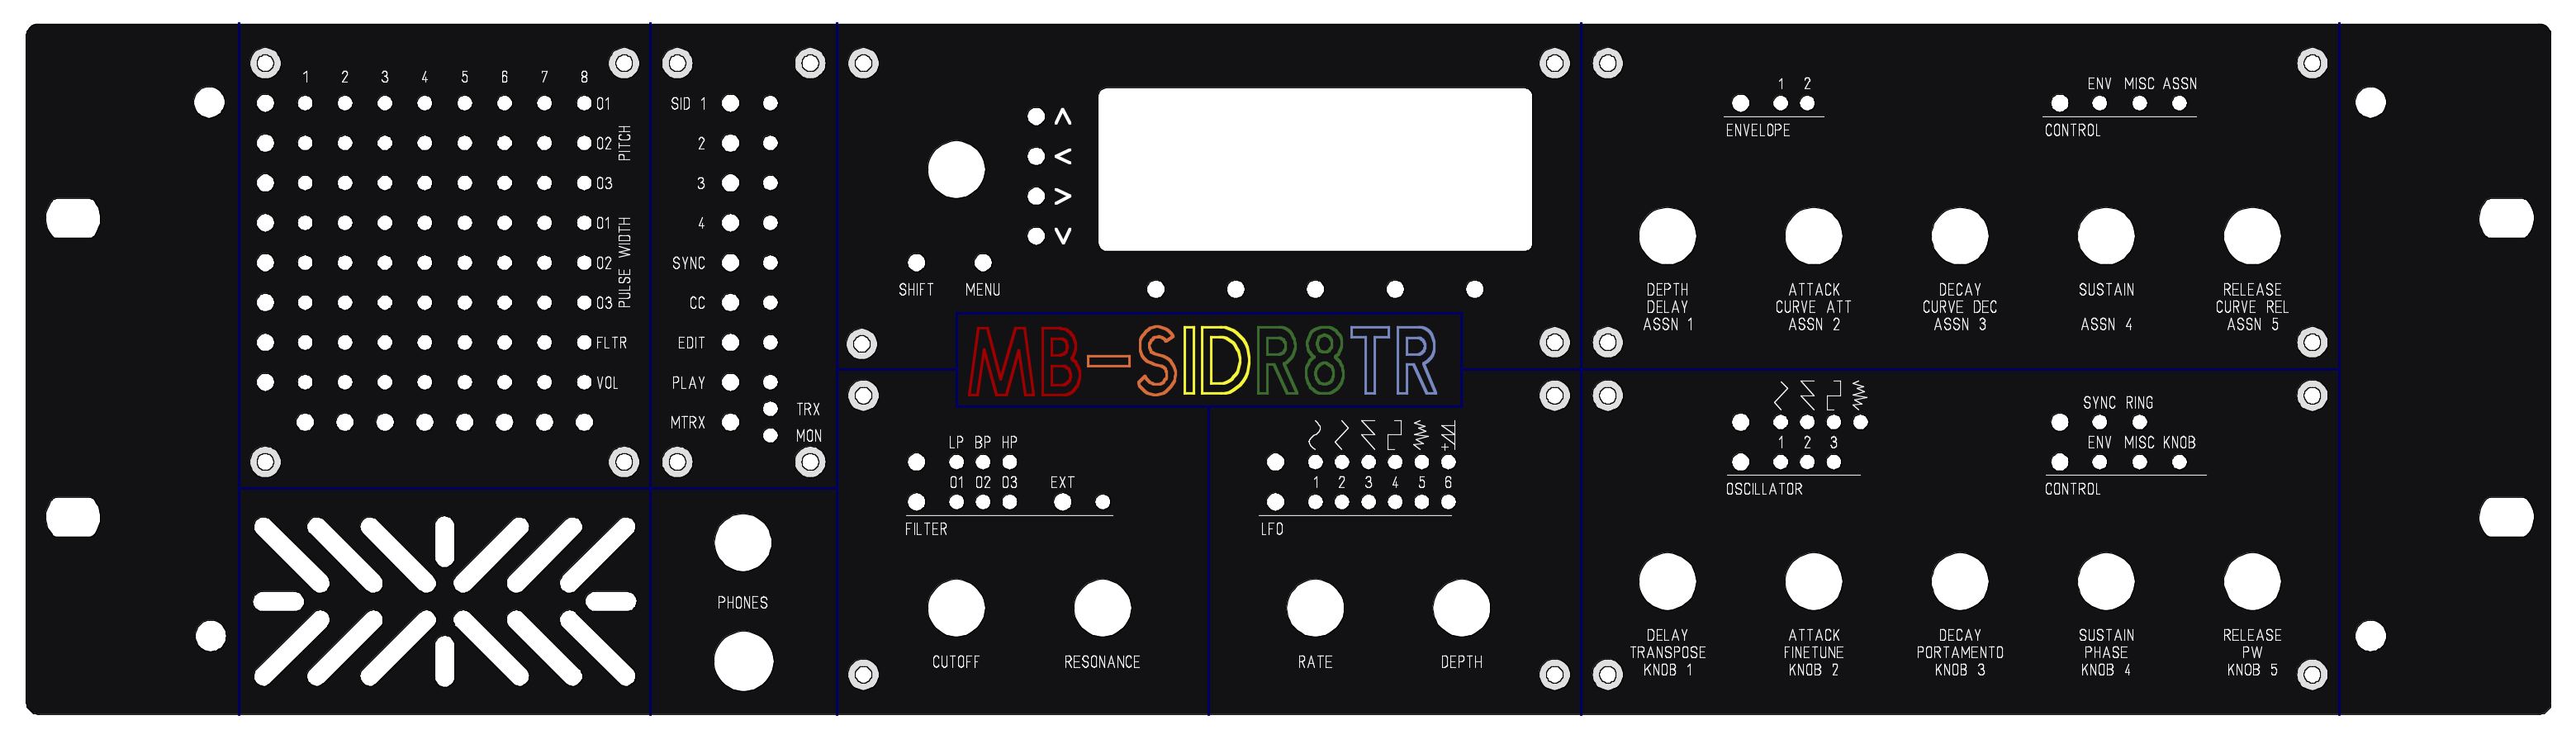 mb-sidr8tr:front-panel.png